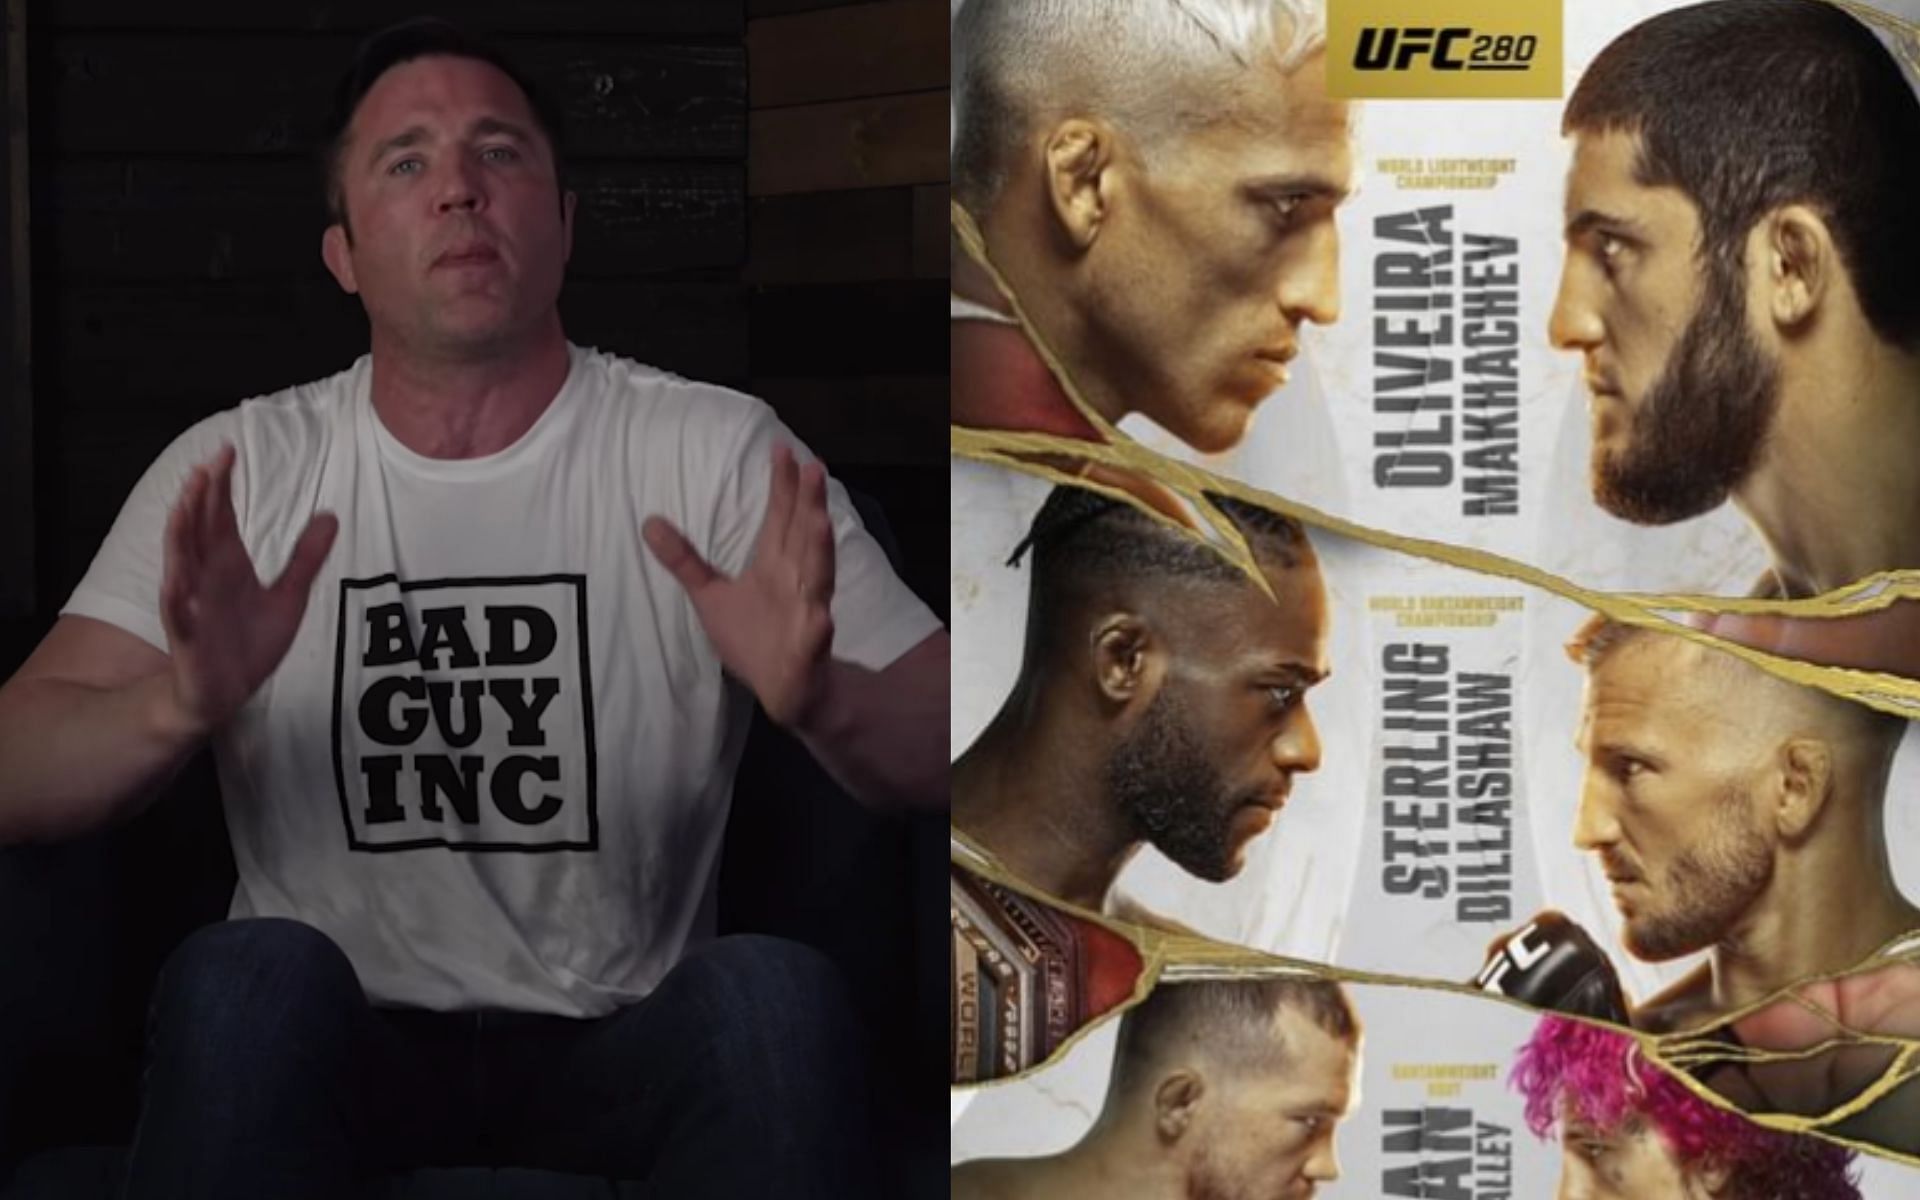 Chael Sonnnen (left), UFC 280 poster (right) [Images courtesy of @ufc &amp; @sonnench on Instagram]